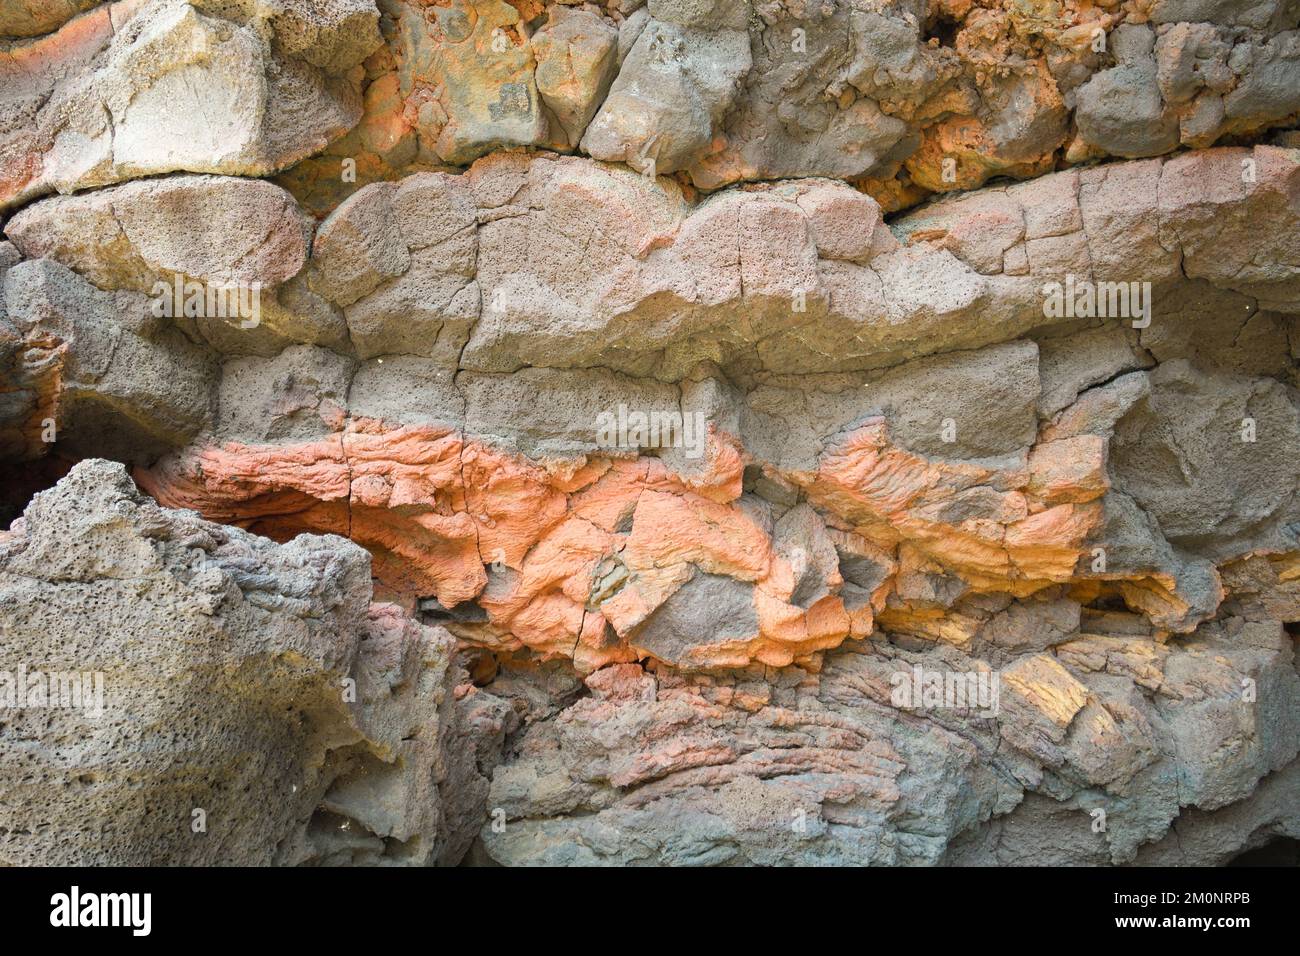 Detail of the shapes and colors of the lava rocks in Lanzarote Stock Photo